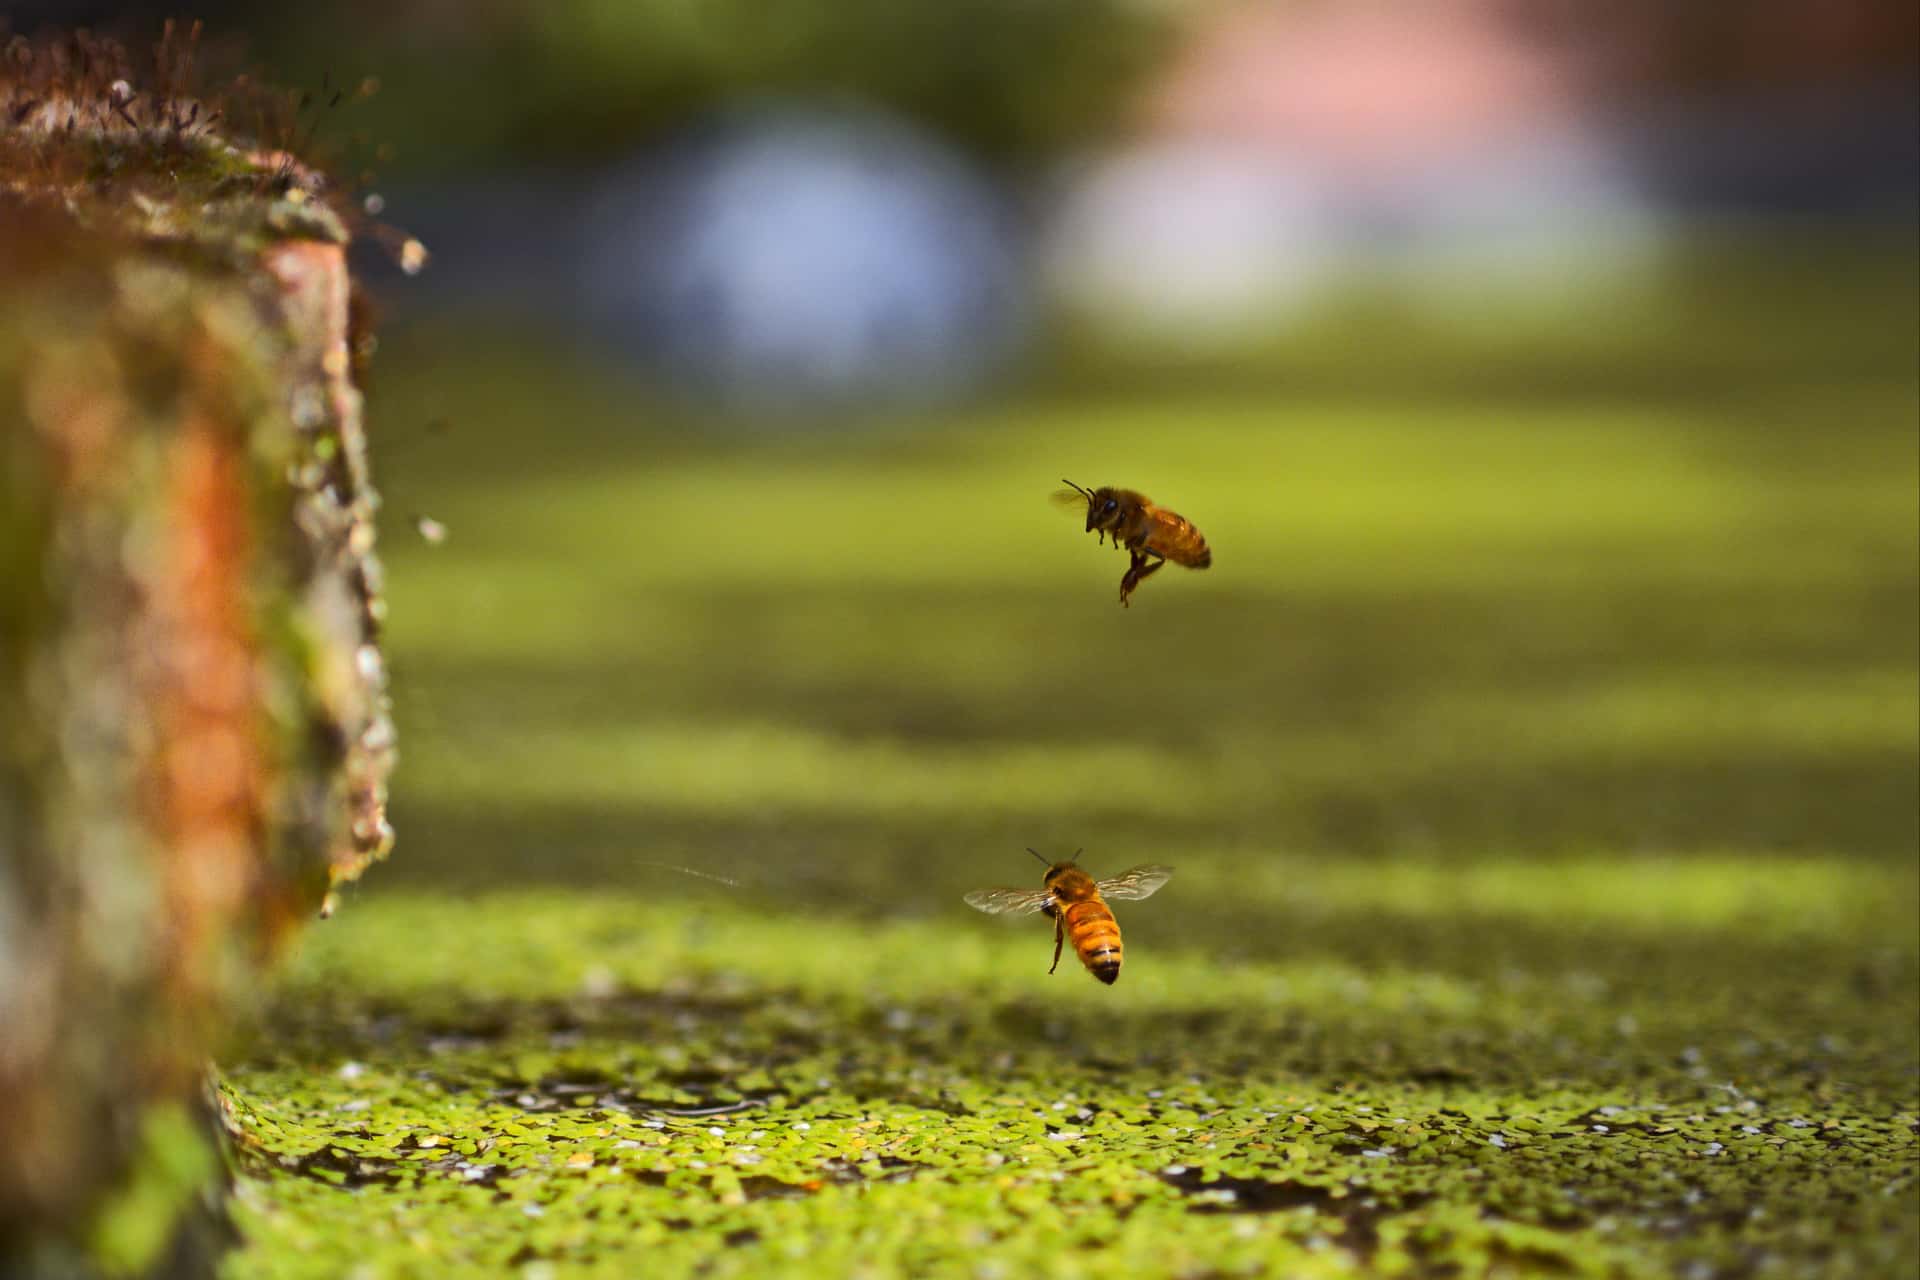 temporal composite of a honey bee flying over duckweed